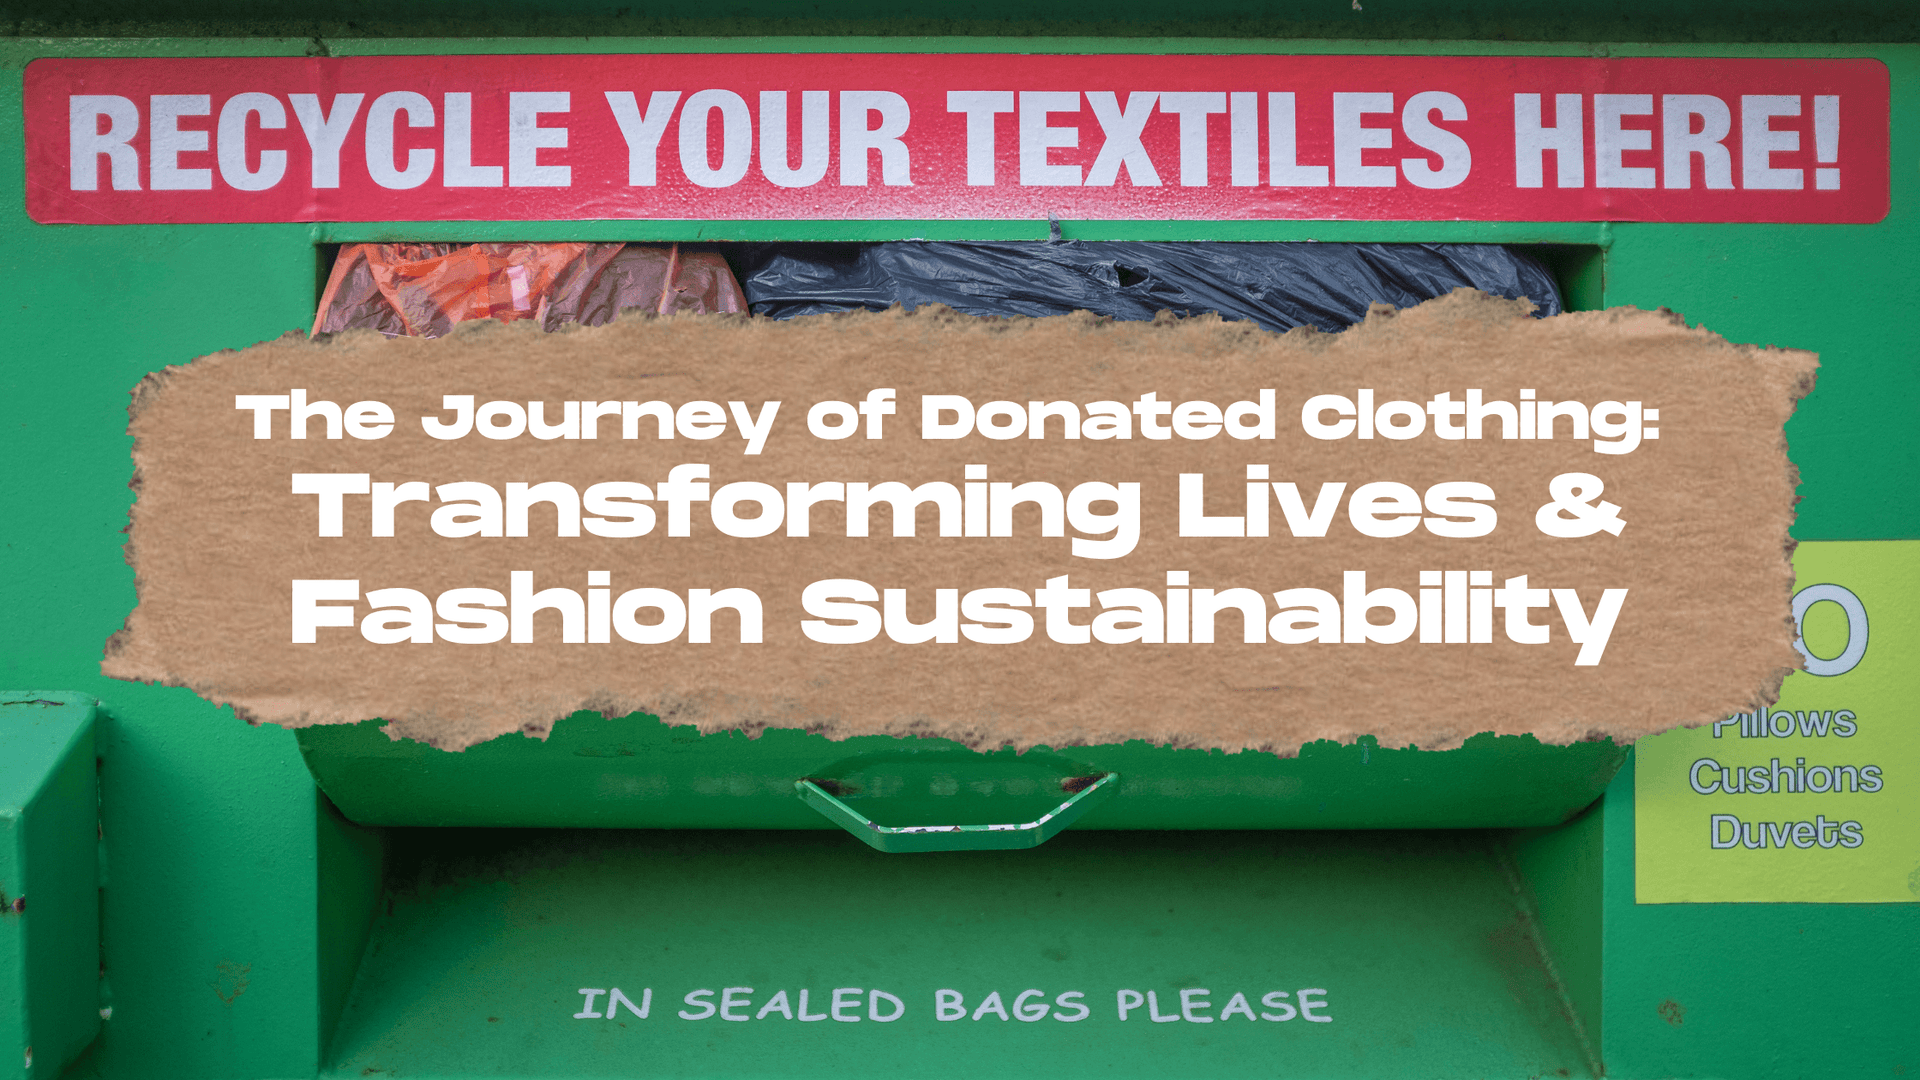 The Journey of Donated Clothing: Transforming Lives and Fashion Sustainability